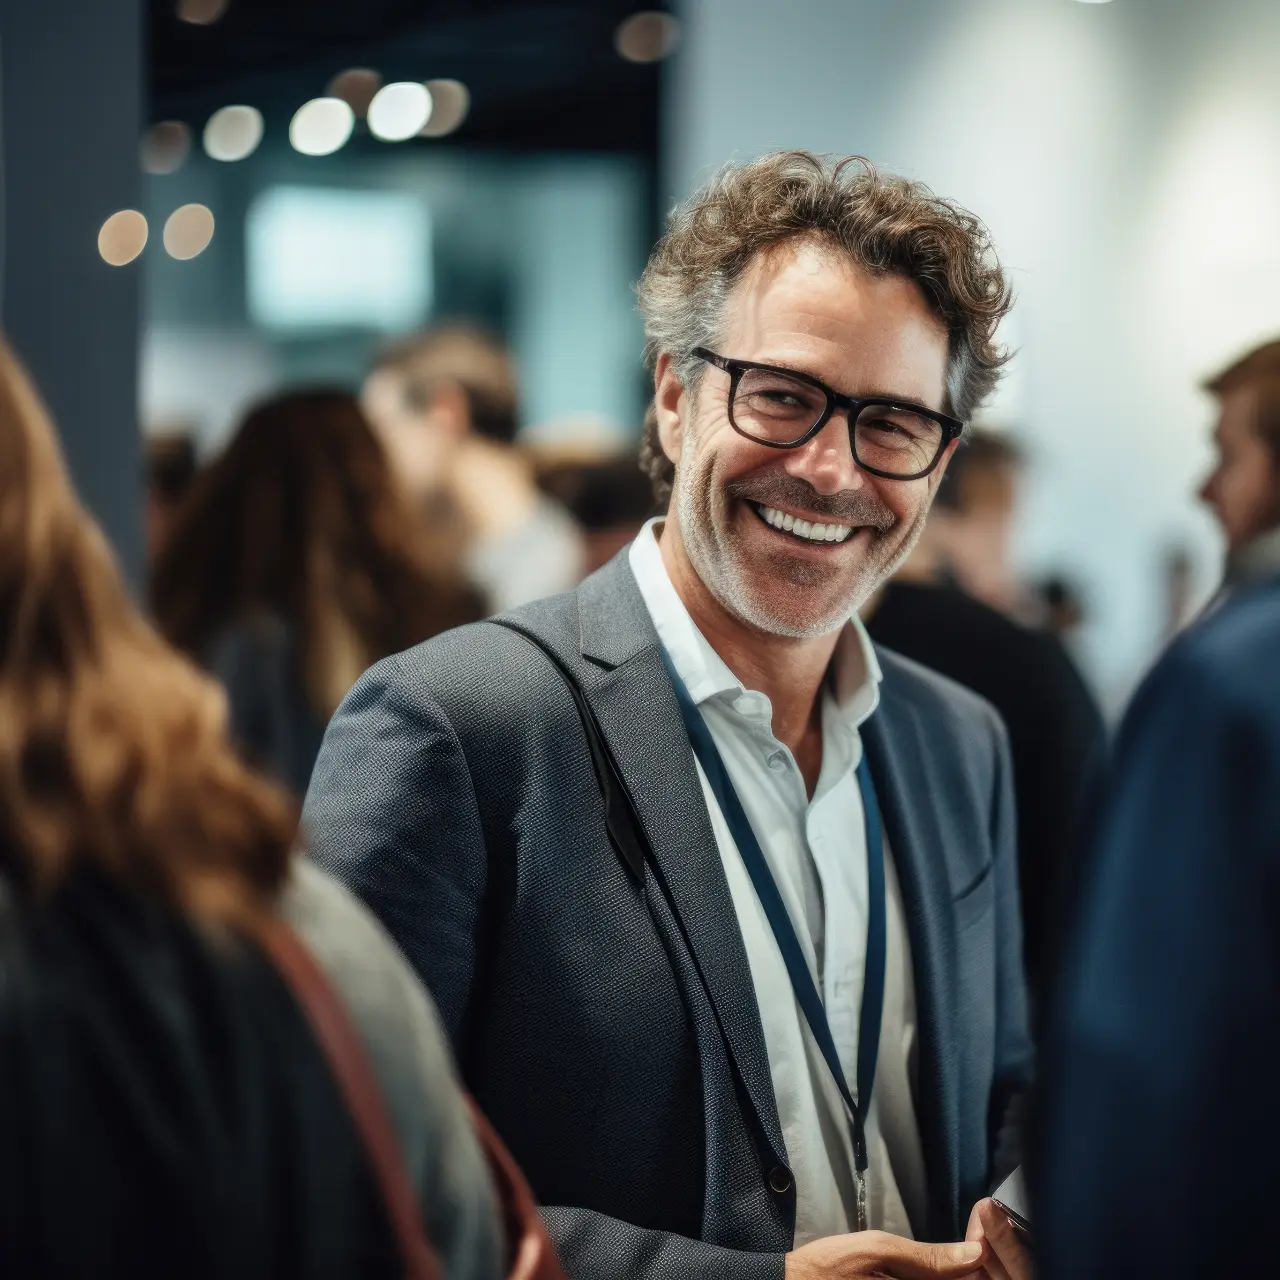 Business man at professional event being present and smiling